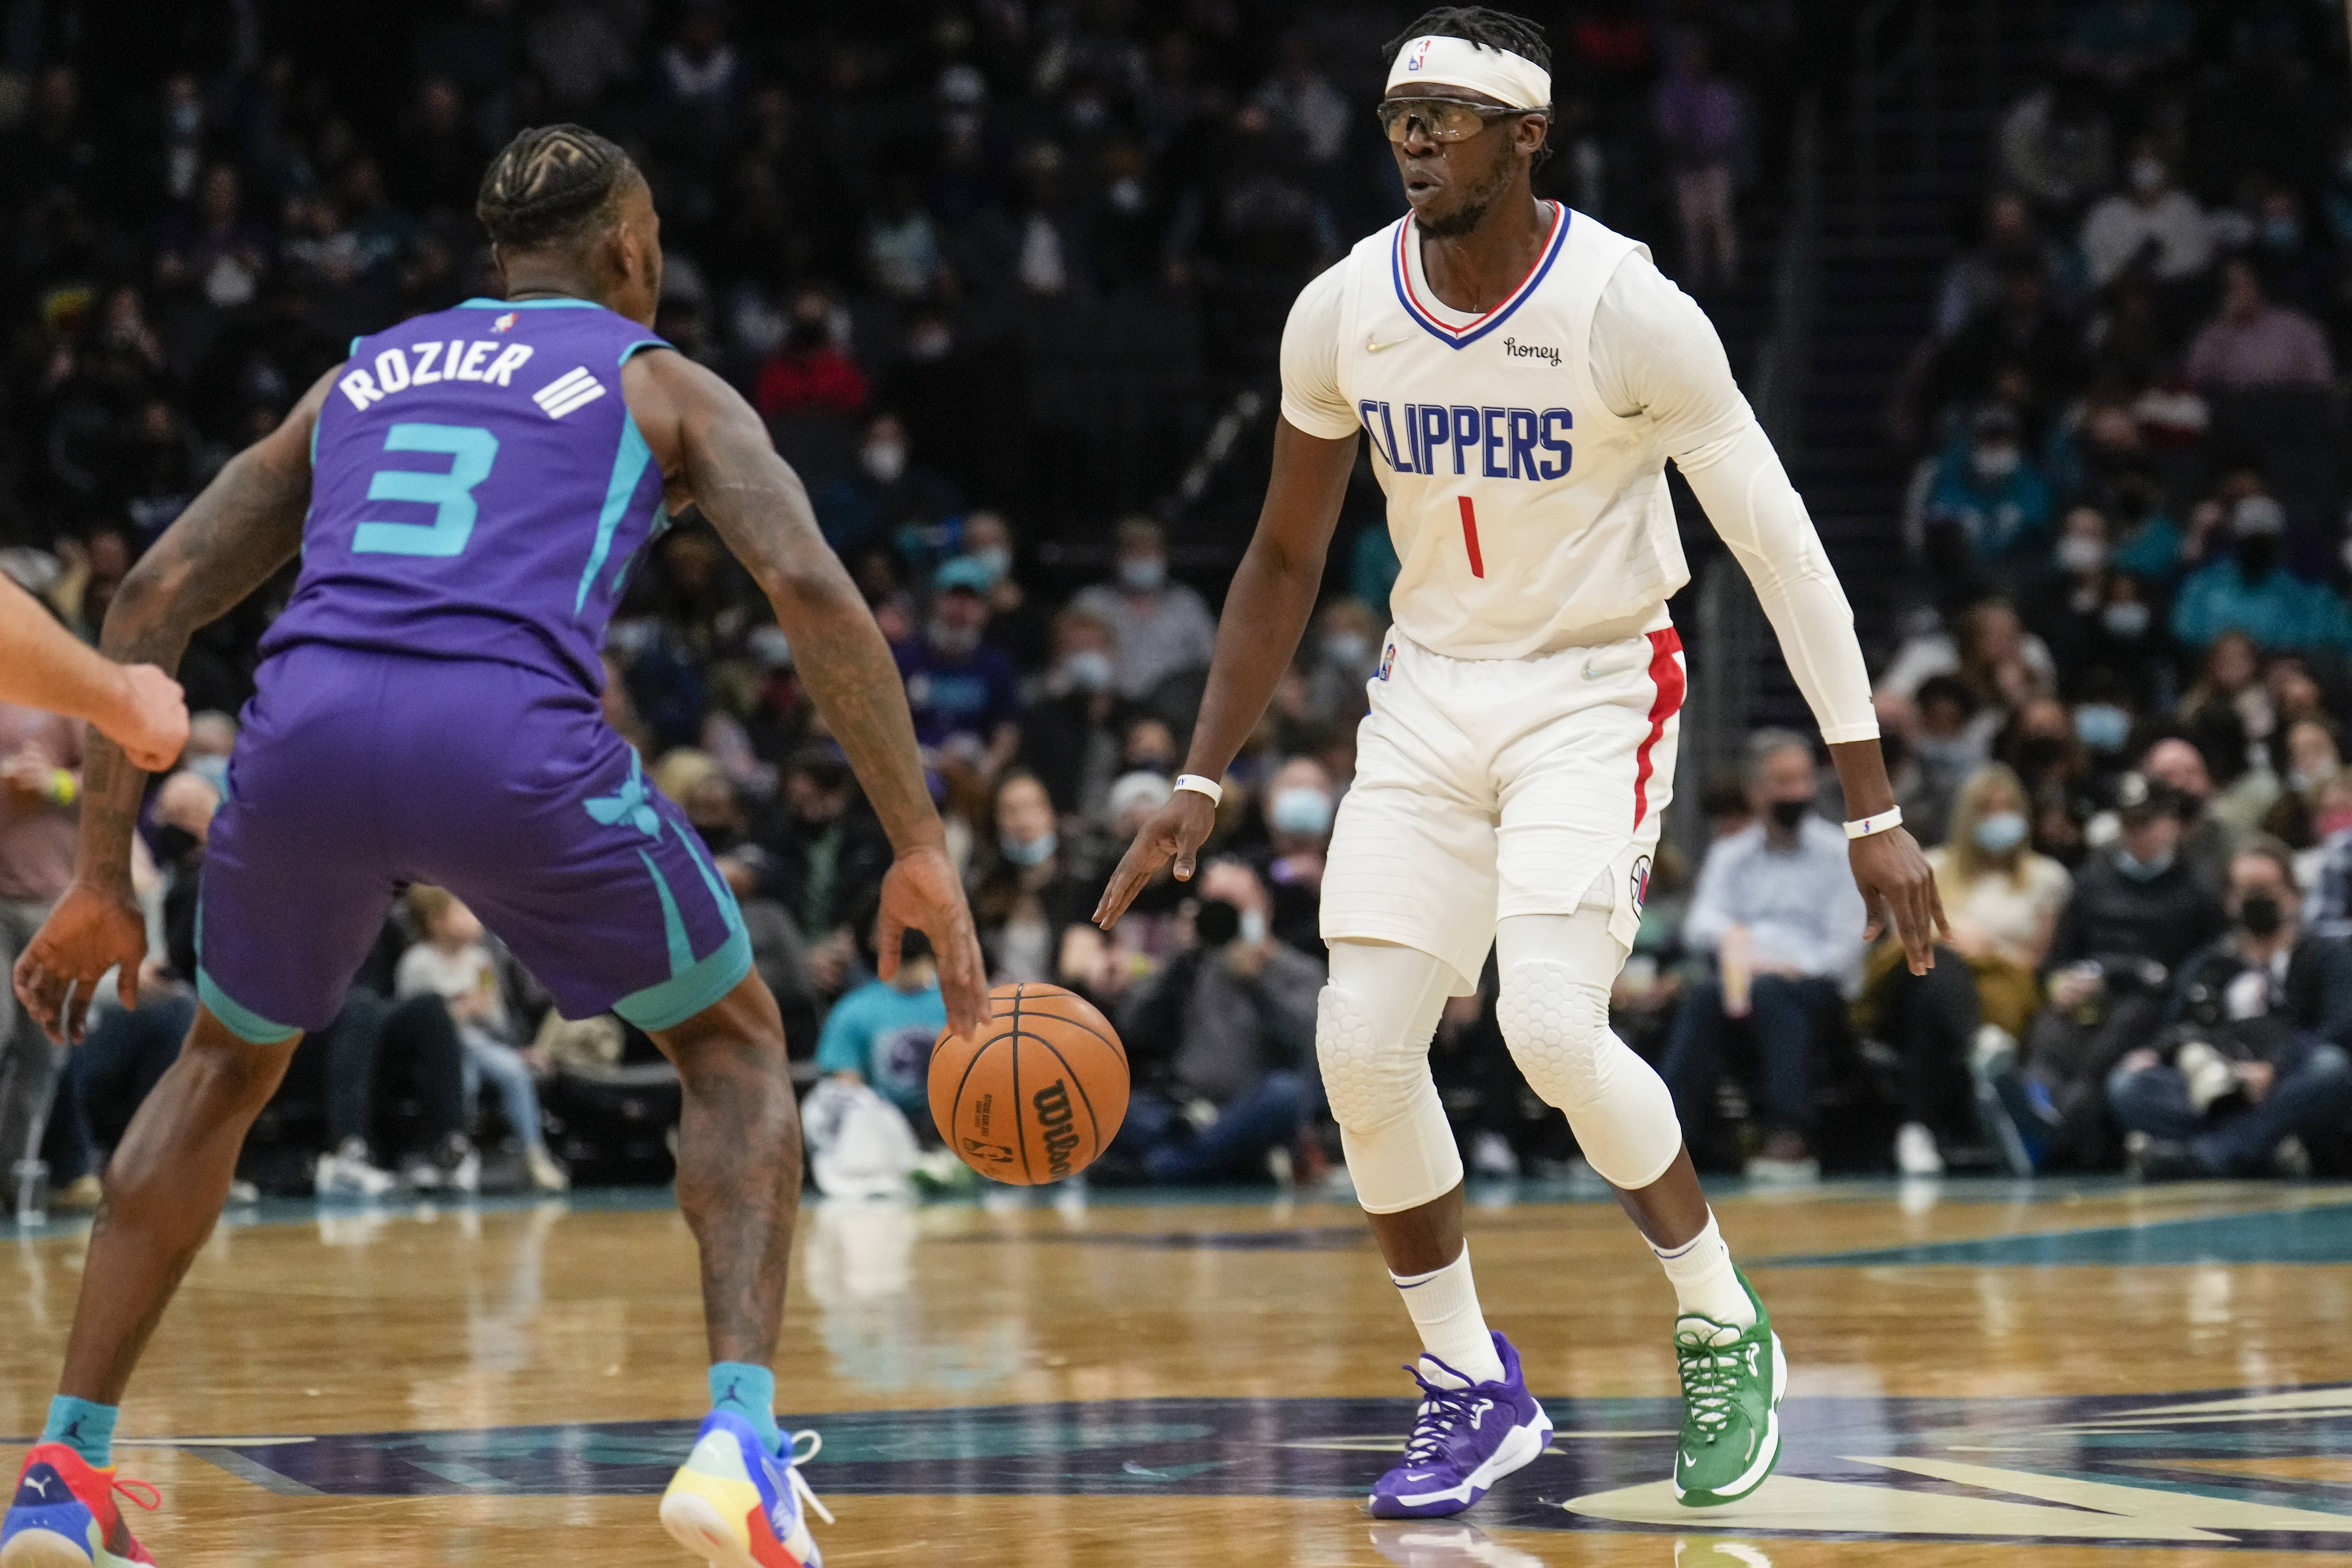 LA Clippers guard Reggie Jackson (1) on the dribble covered by Charlotte Hornets guard Terry Rozier (3) during the second half at the Spectrum Center.